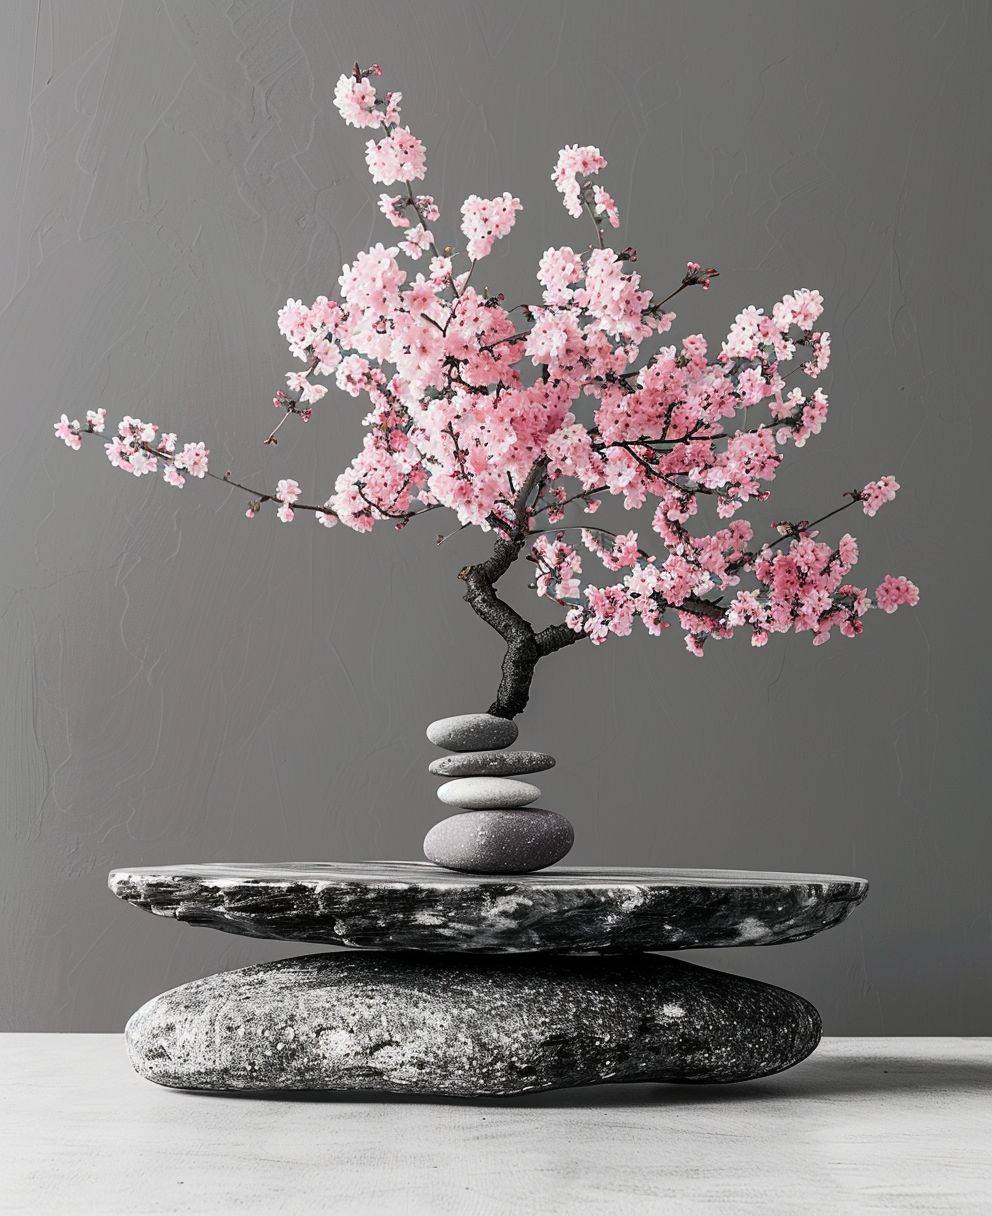 Hyper realistic photography, black and white photography, stones balancing in a symmetrical way, with a pink cherry tree bonsai.